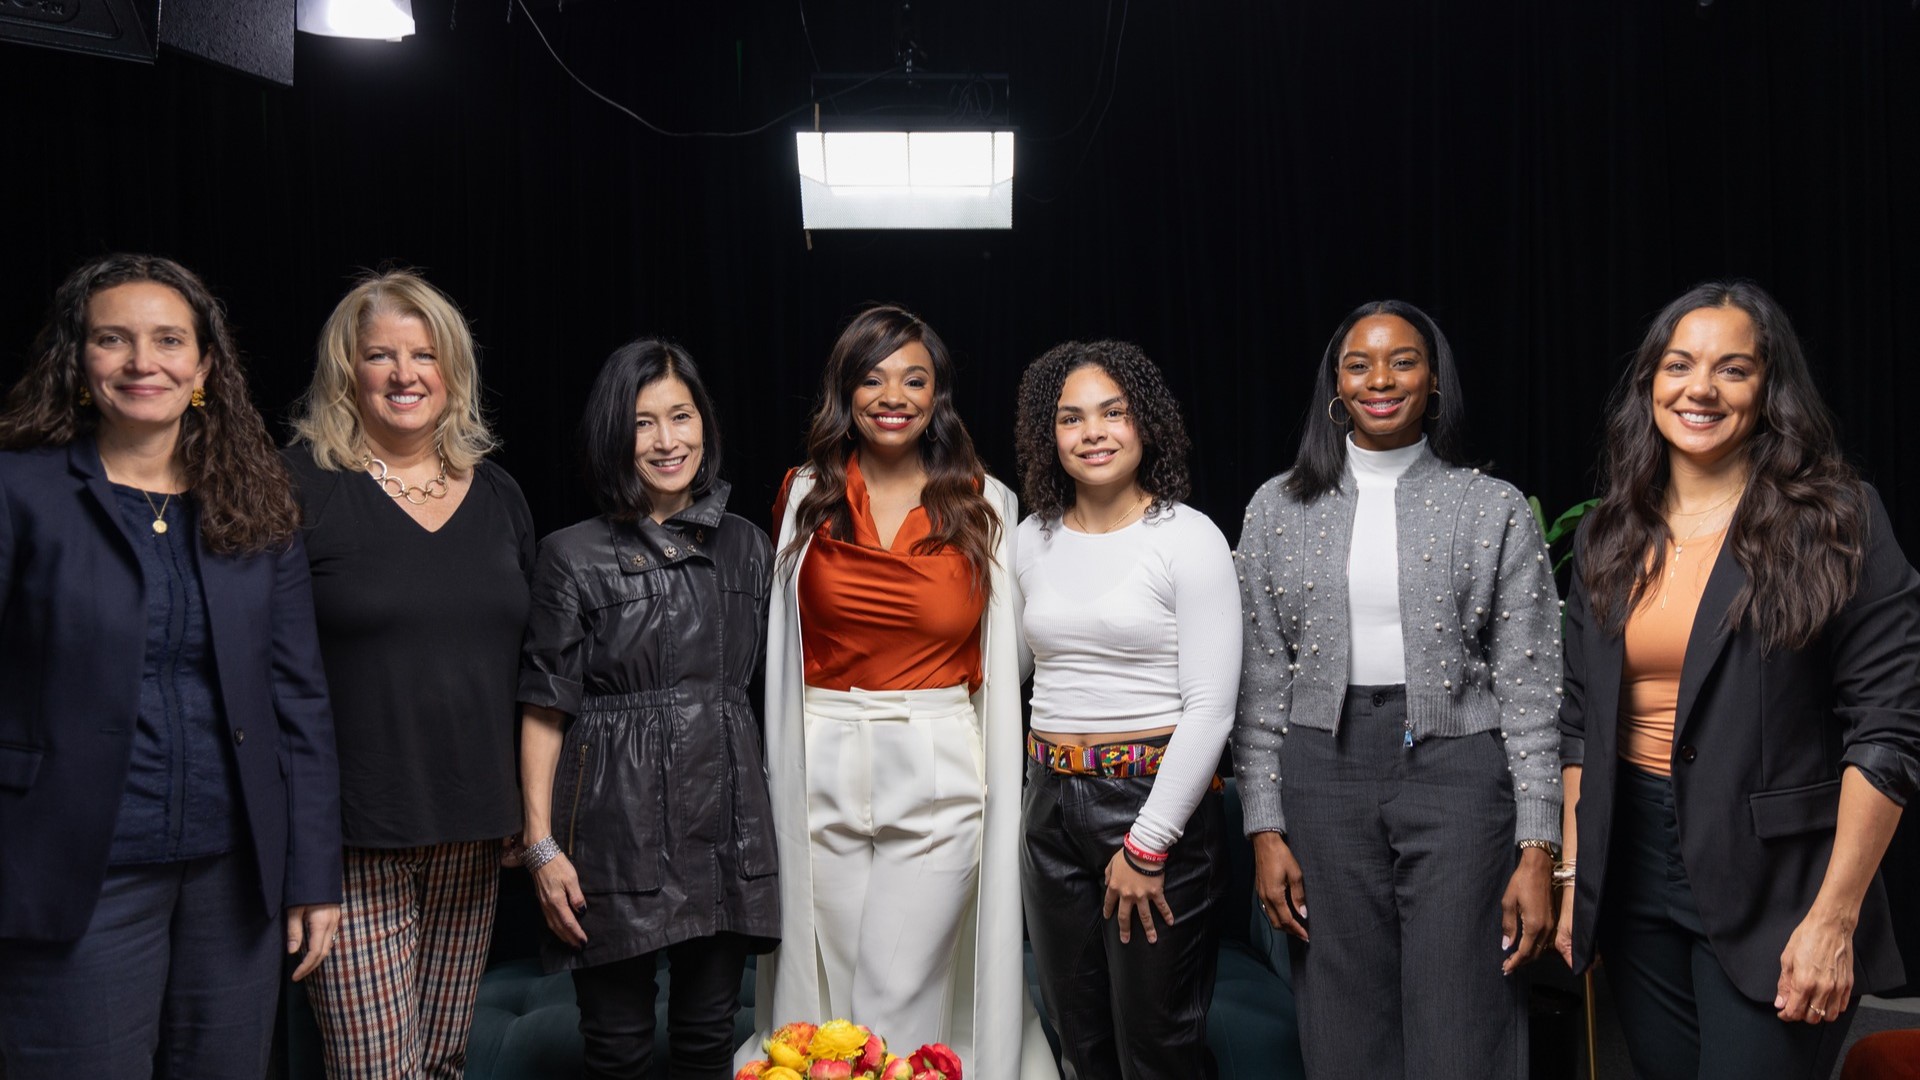 KD Hall Foundation launches new talk show celebrating women